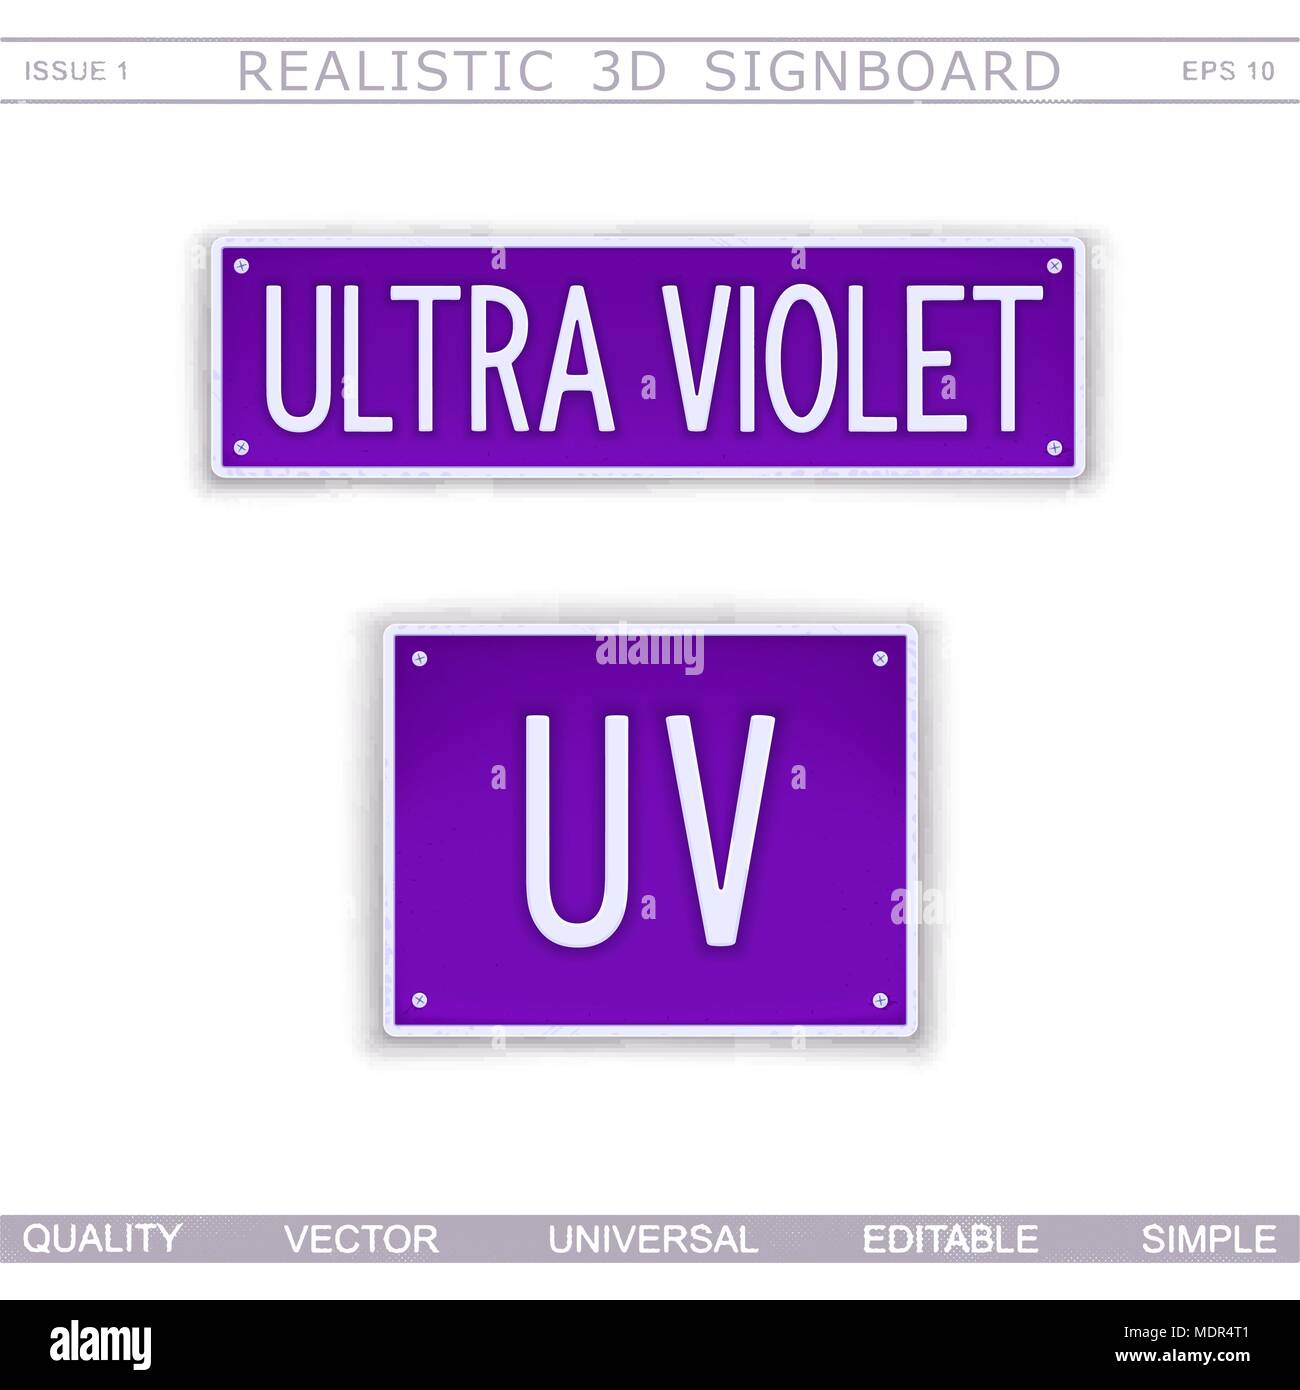 Ultra violet. UV radiation. Signboard, stylized car license plate. Top view. Vector design elements Stock Vector